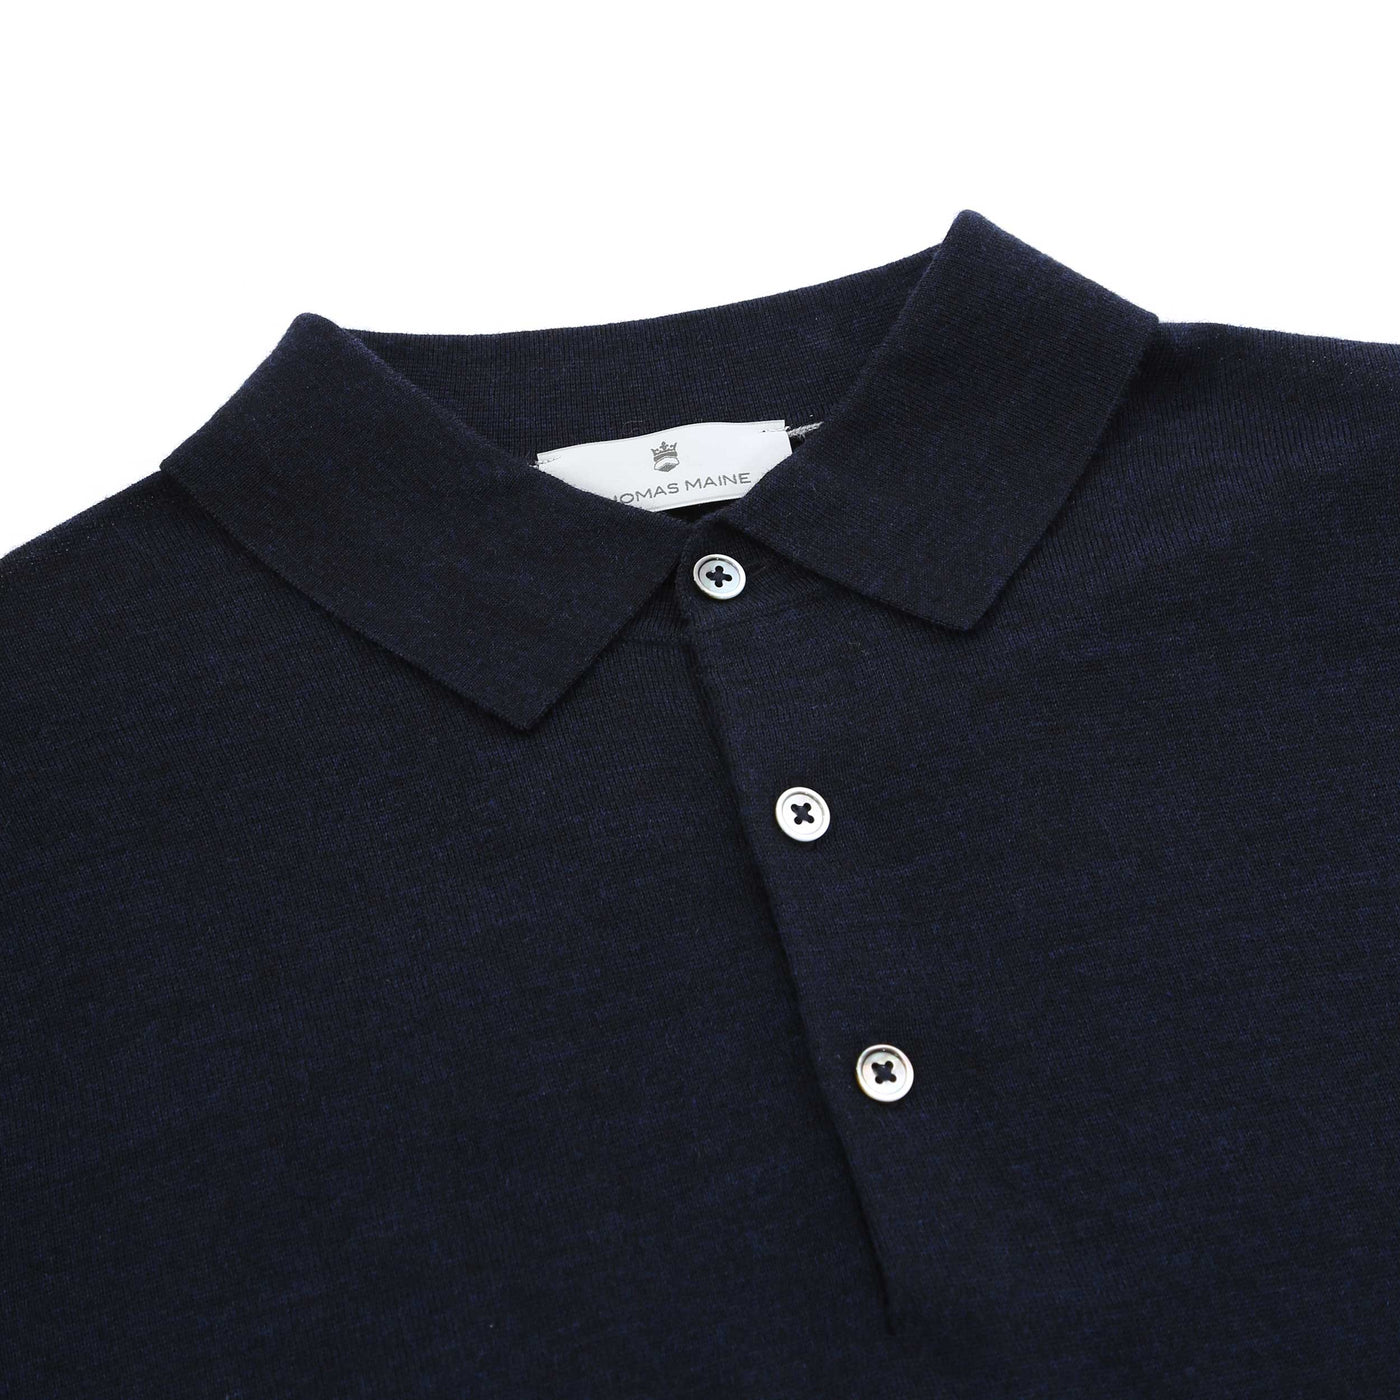 Thomas Maine 3 Button Knit Polo in Navy Placket